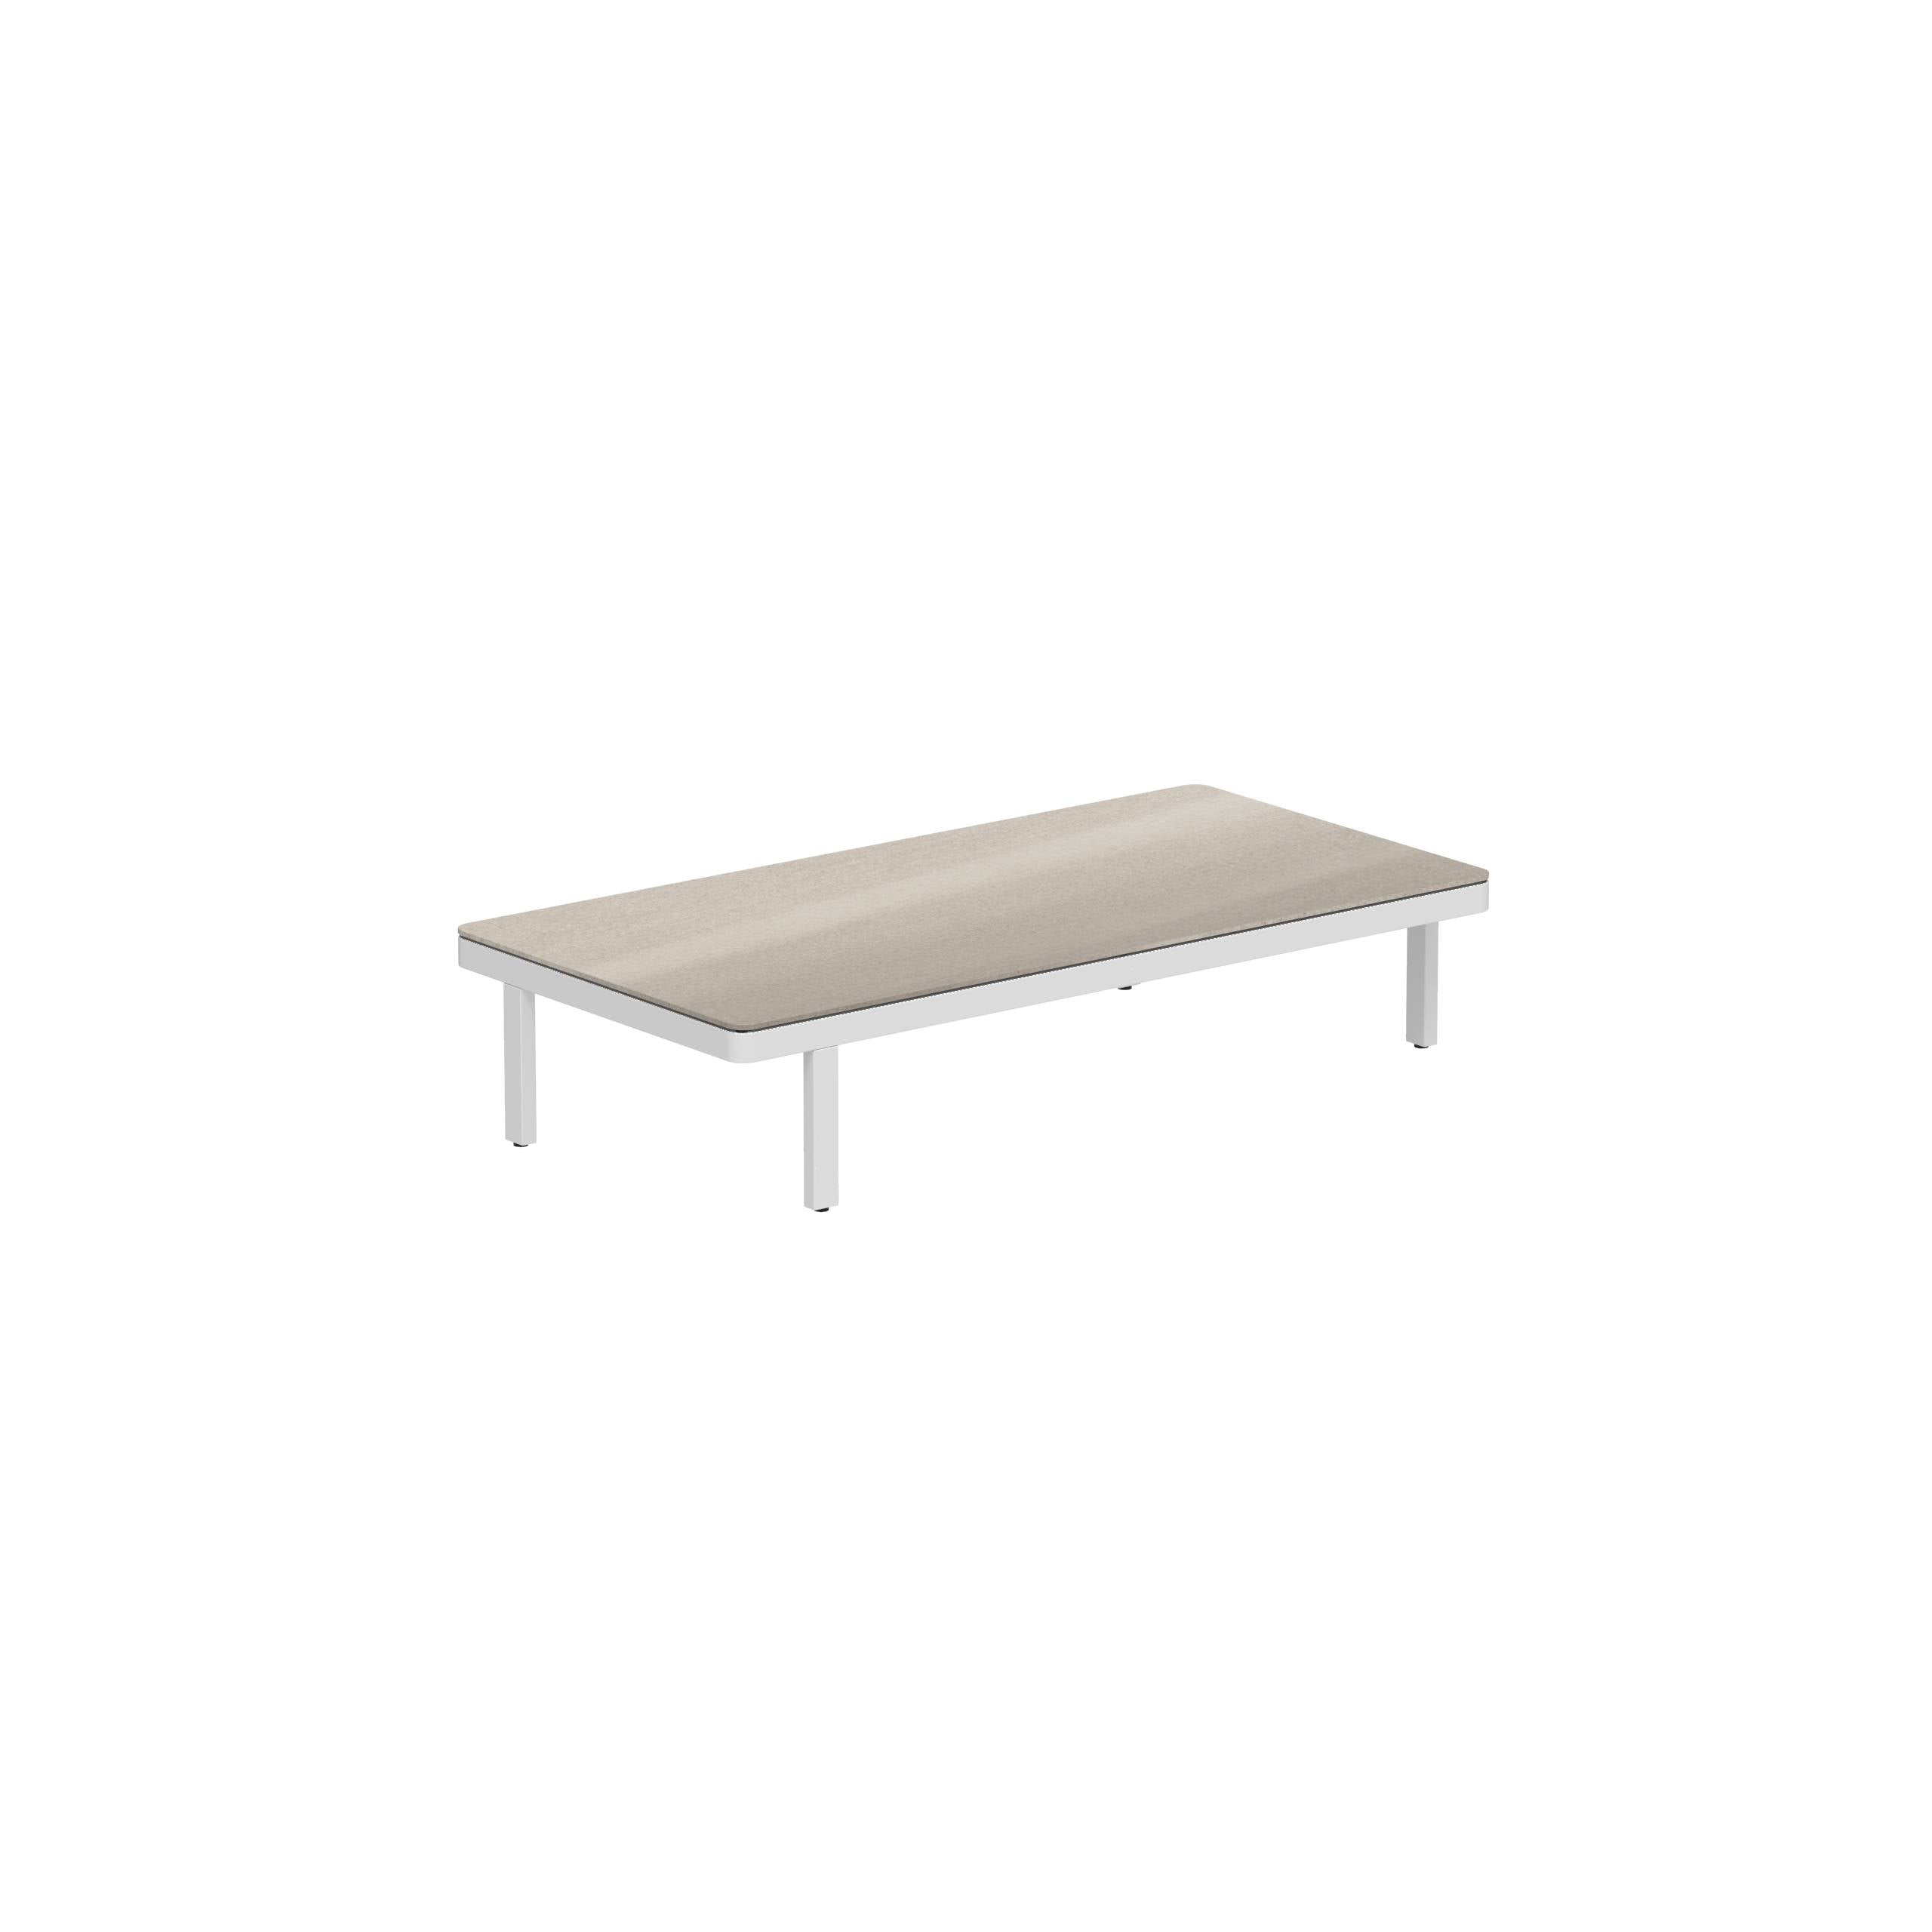 Alura Lounge 160 Lth Table 160x80x34cm White Ceramic Tabletop Taupe Grey